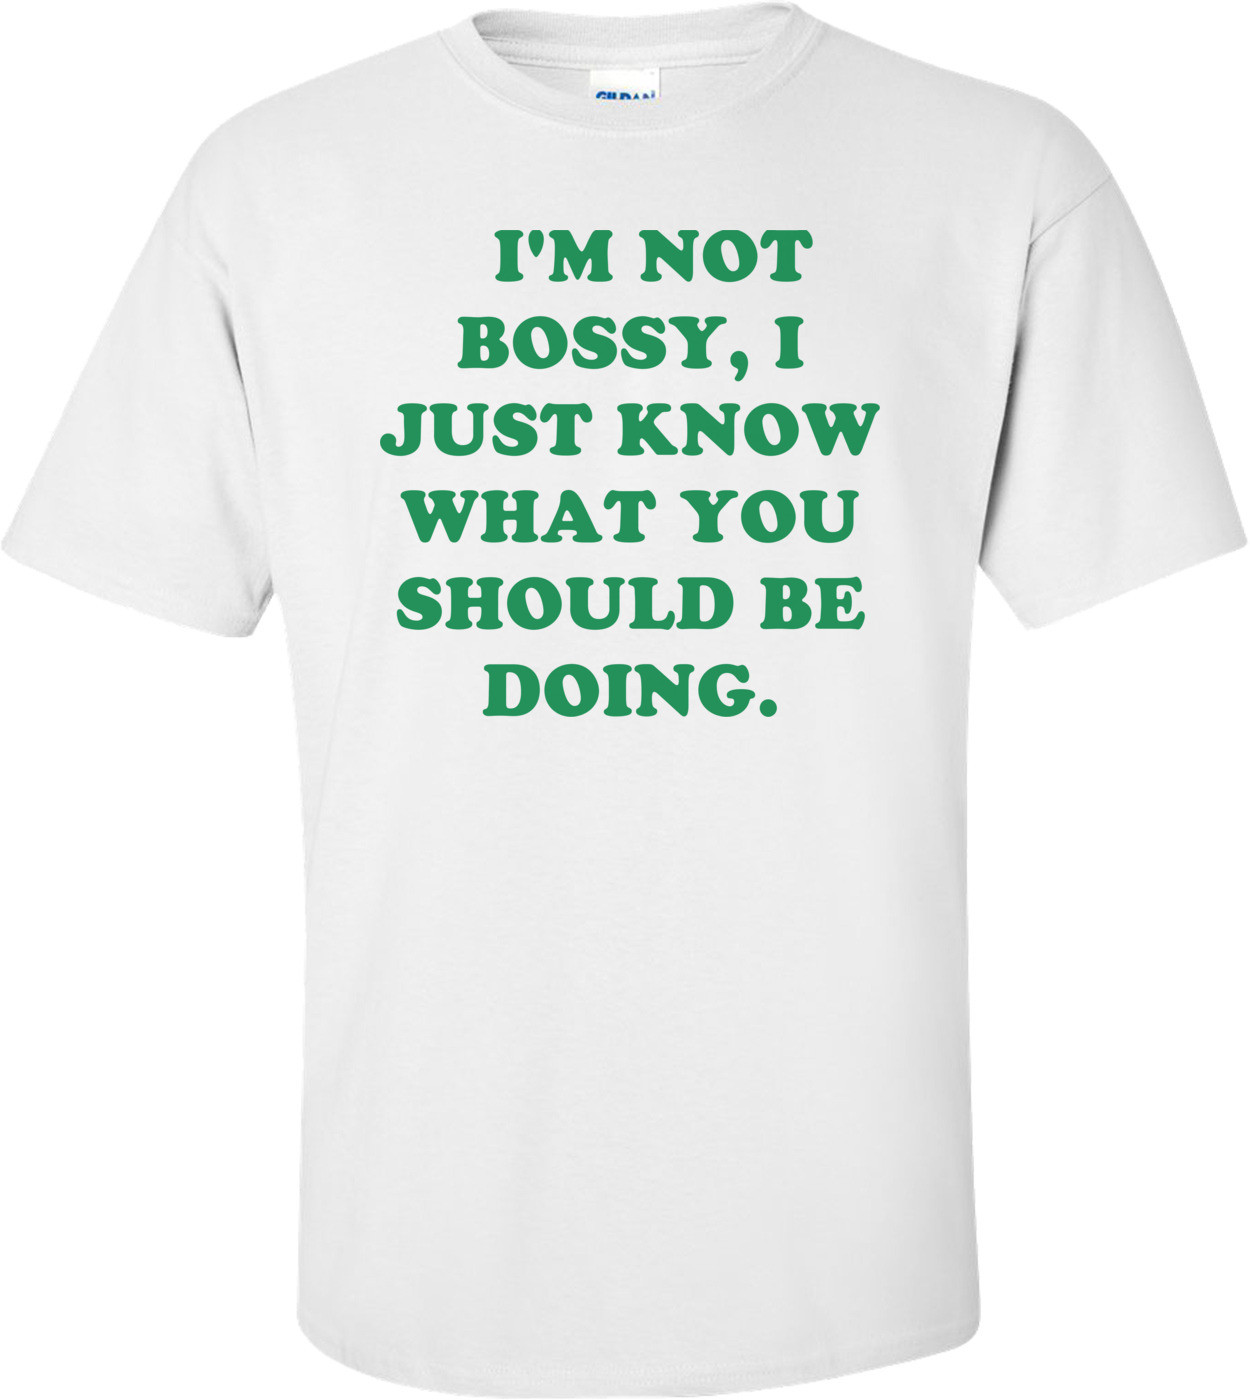   I'M NOT BOSSY, I JUST KNOW WHAT YOU SHOULD BE DOING. Shirt